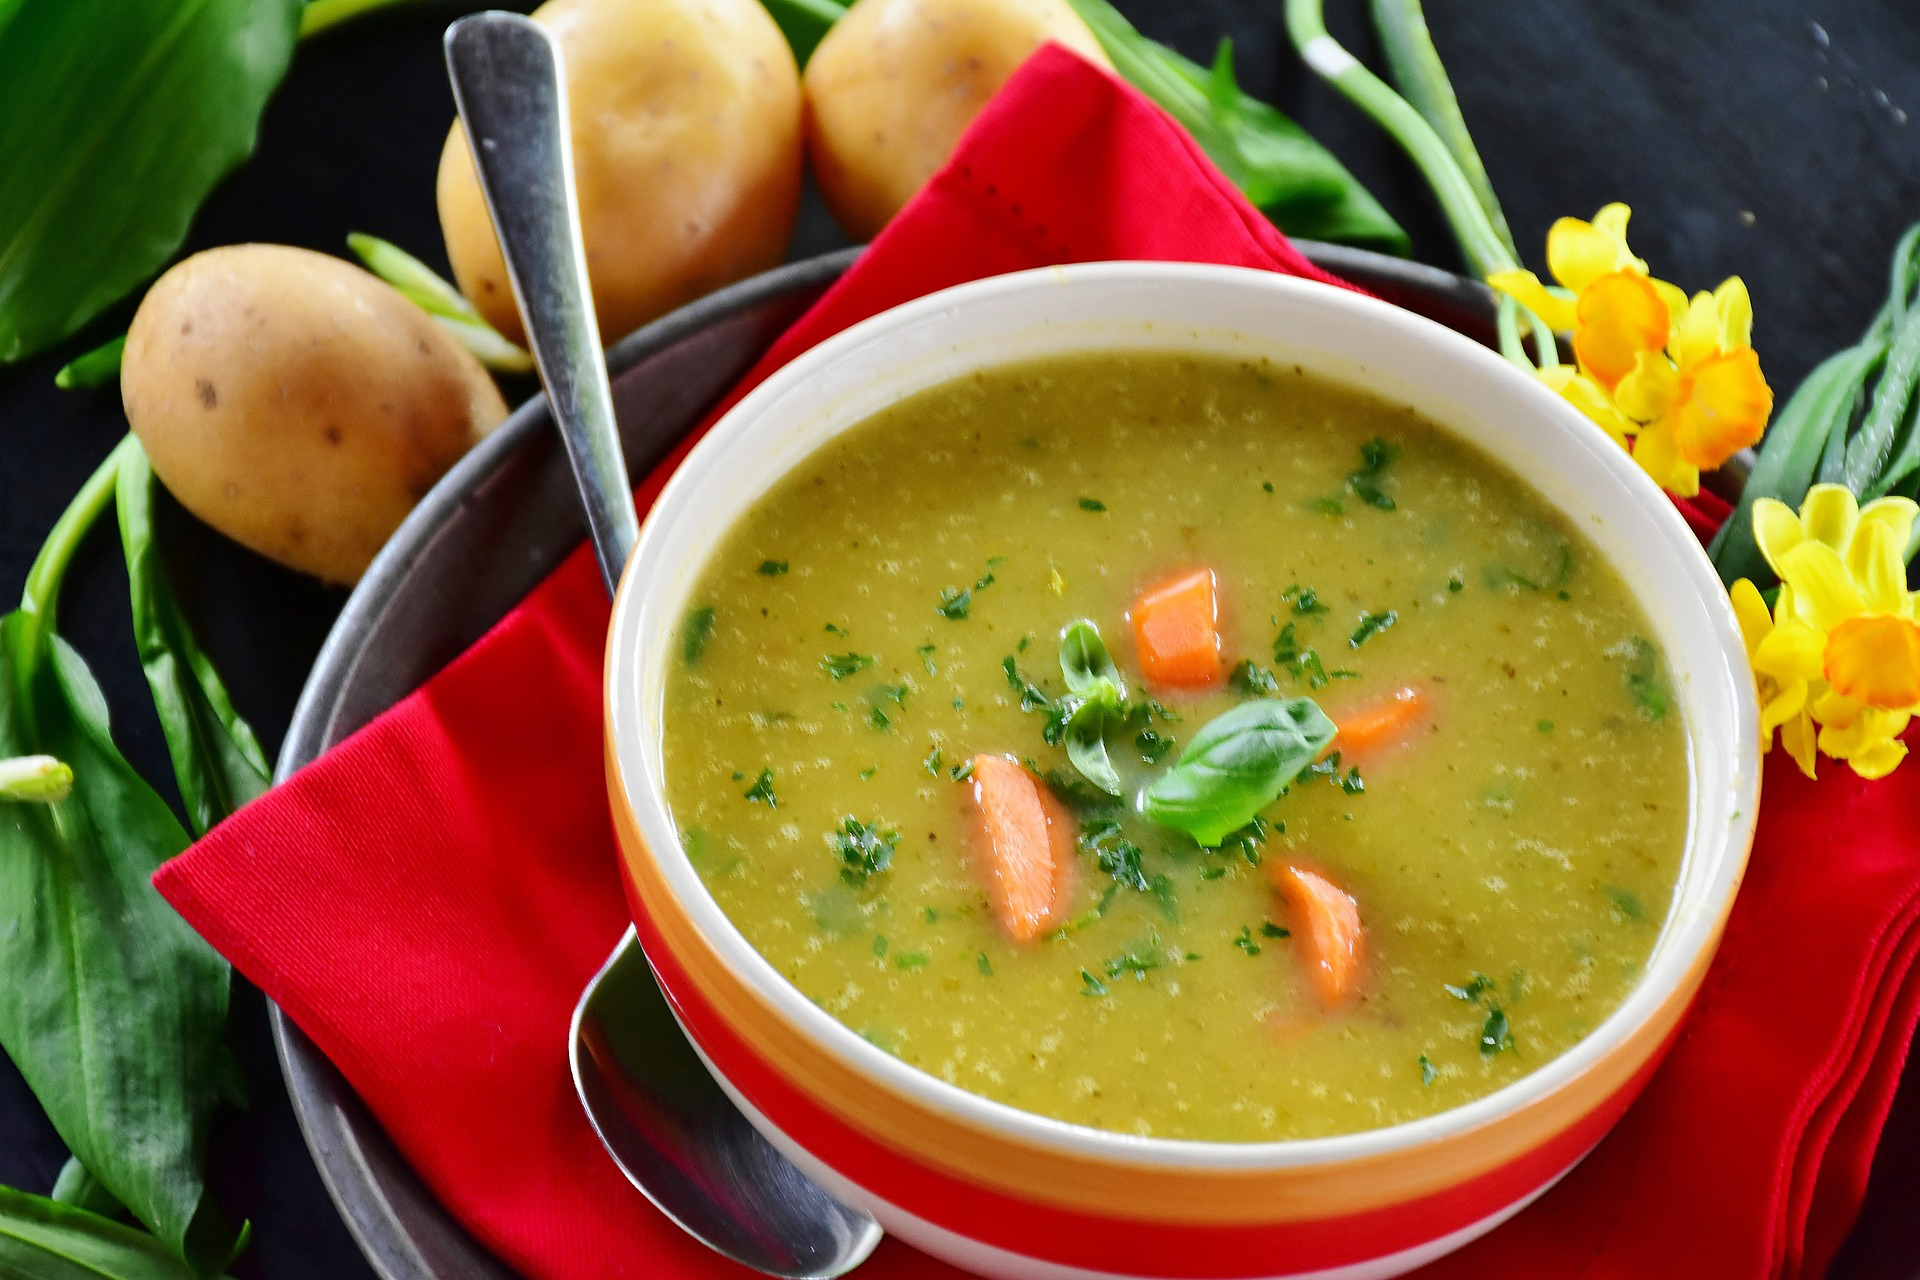 MCC offering healthy soups class